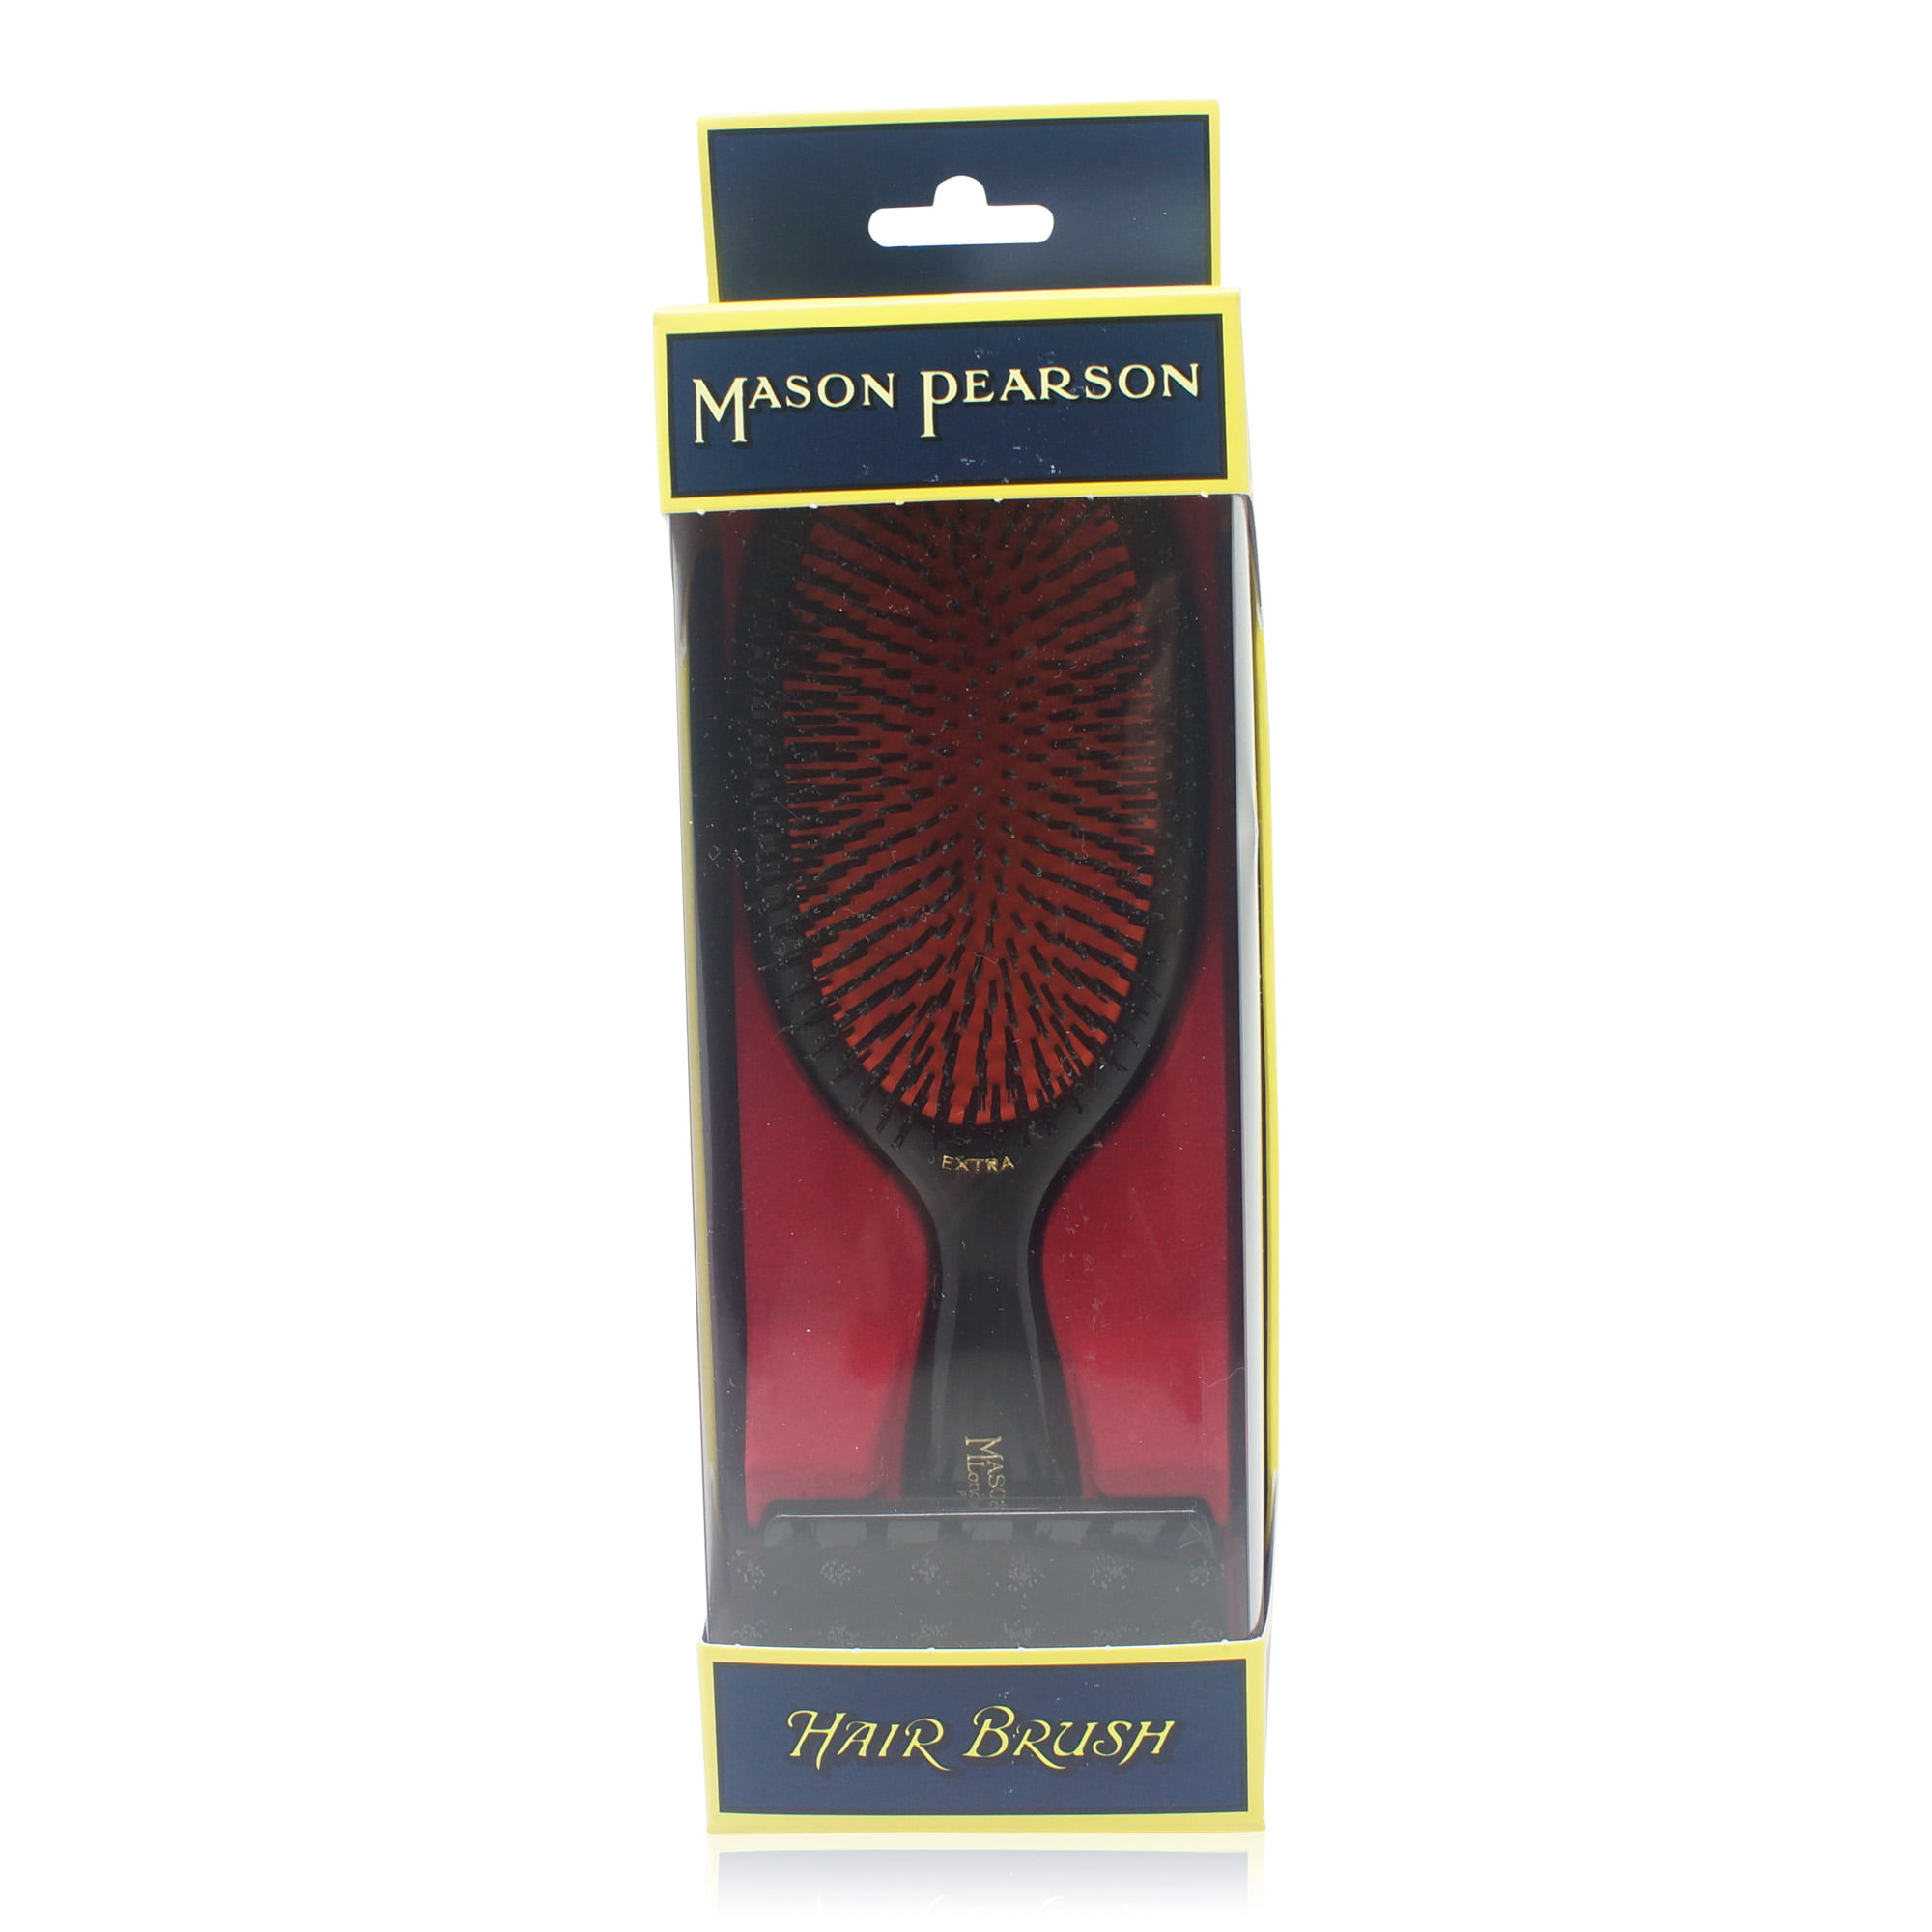 335 Value) Mason Pearson Extra Brush Pure Cleaning Large Bristle with Brush